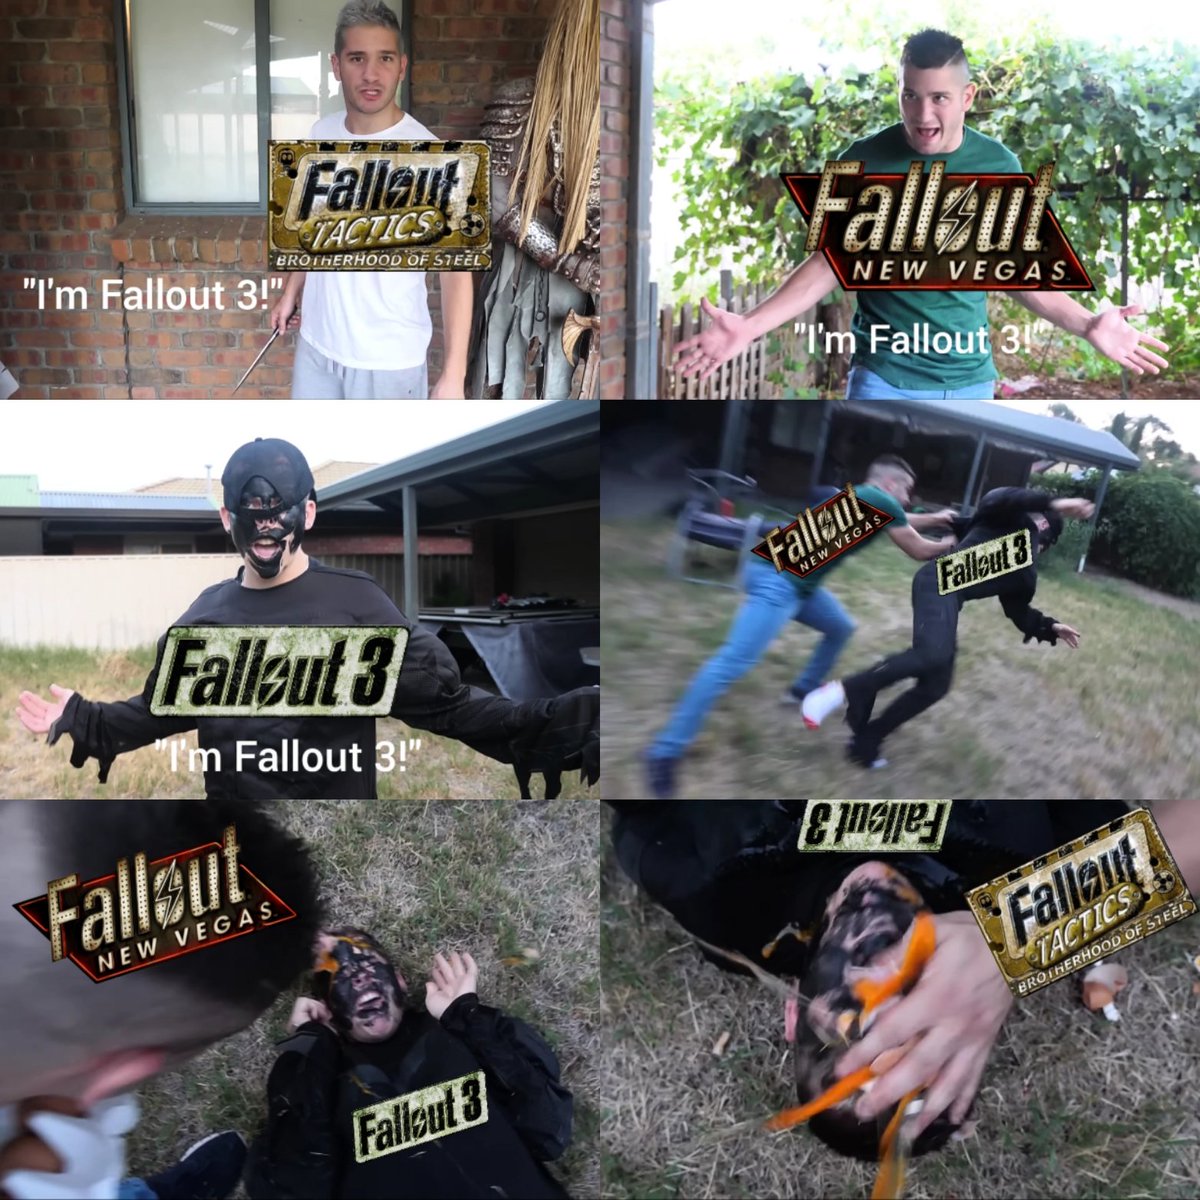 Which one do YOU consider to be the REAL Fallout 3? 👀 🤔
#Fallout #FalloutSeries #FalloutTactics #Fallout3 #FalloutNewVegas #triplethreatmatch #question #therealfallout3 #meme #memes #falloutmeme #falloutmemes